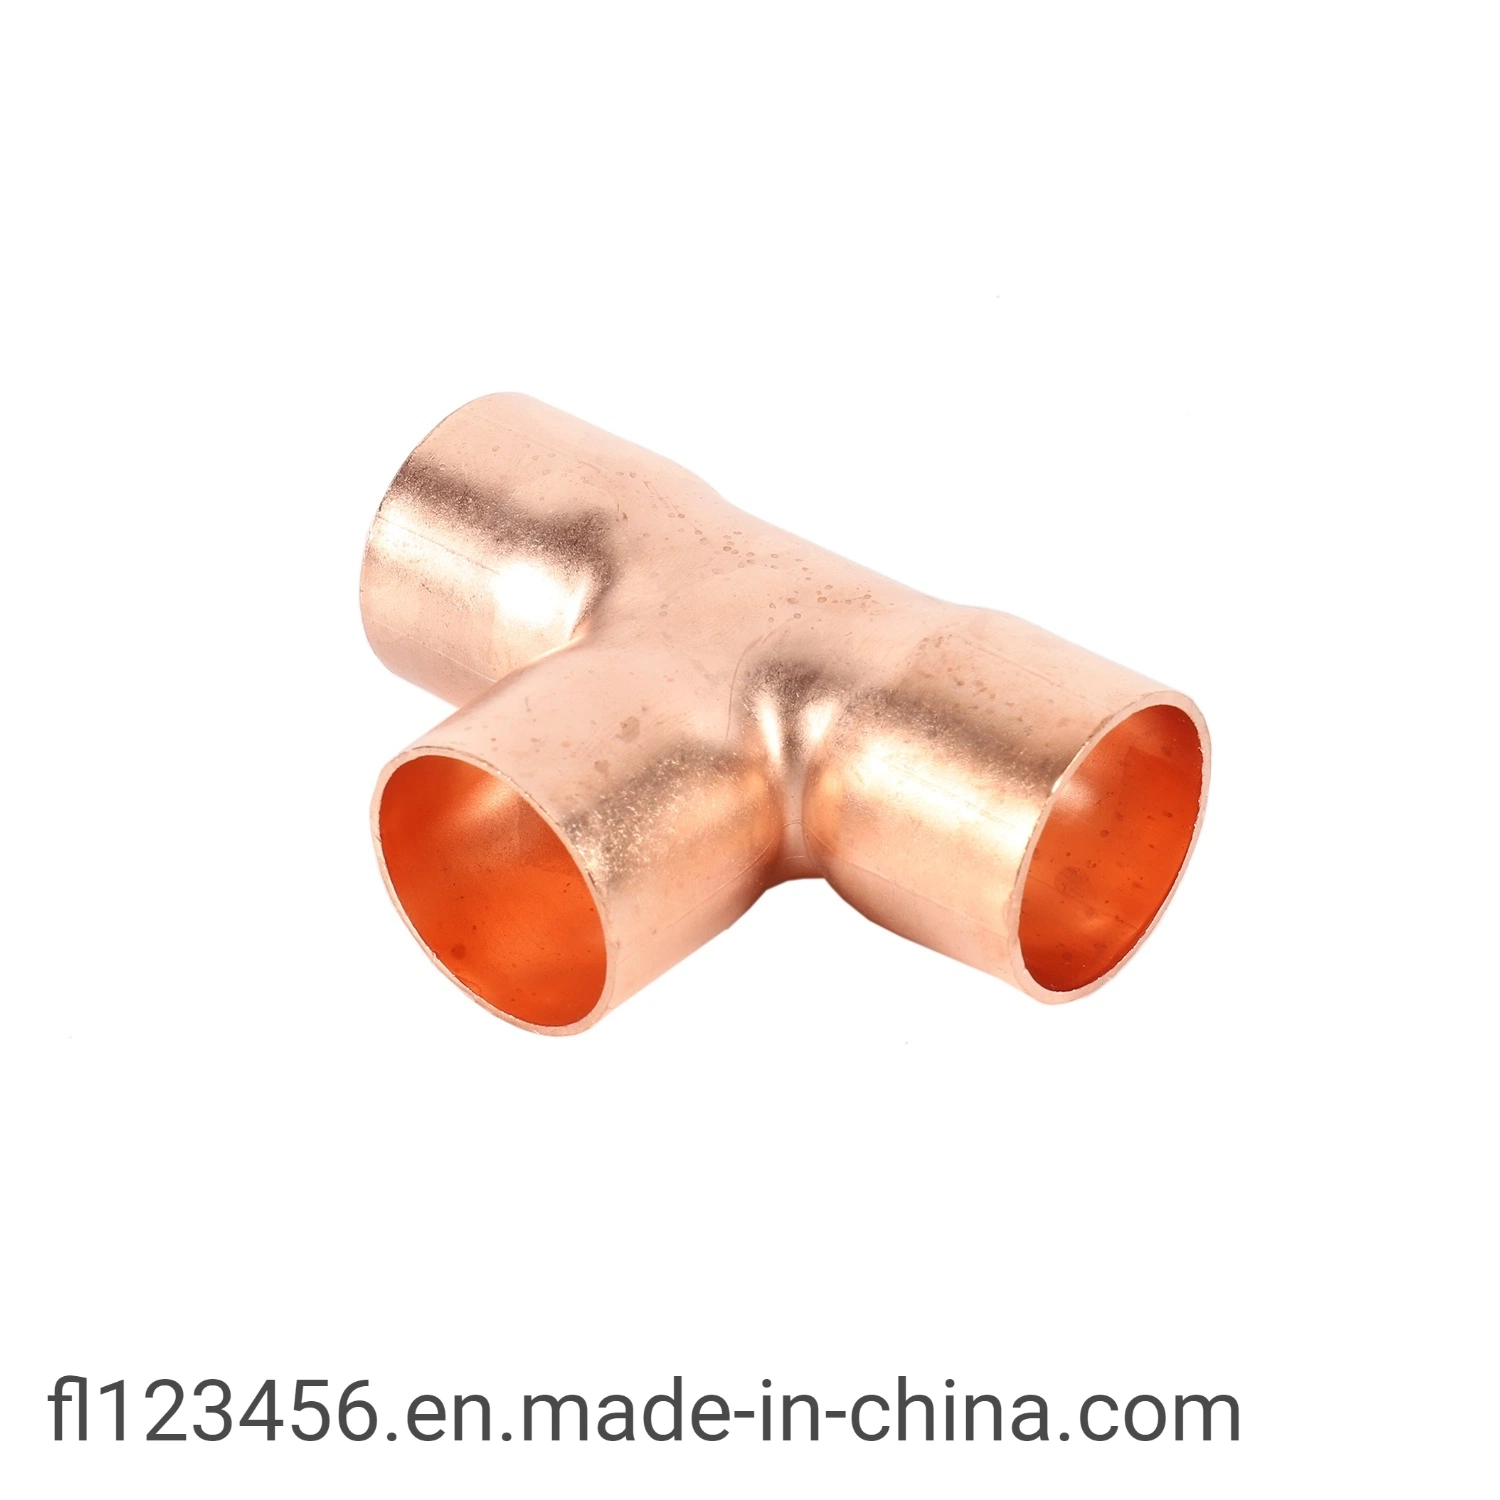 High Quality 3 Way Tee Copper Tube Pipe Copper Pipe for Air Conditioner Copper Press Fittings